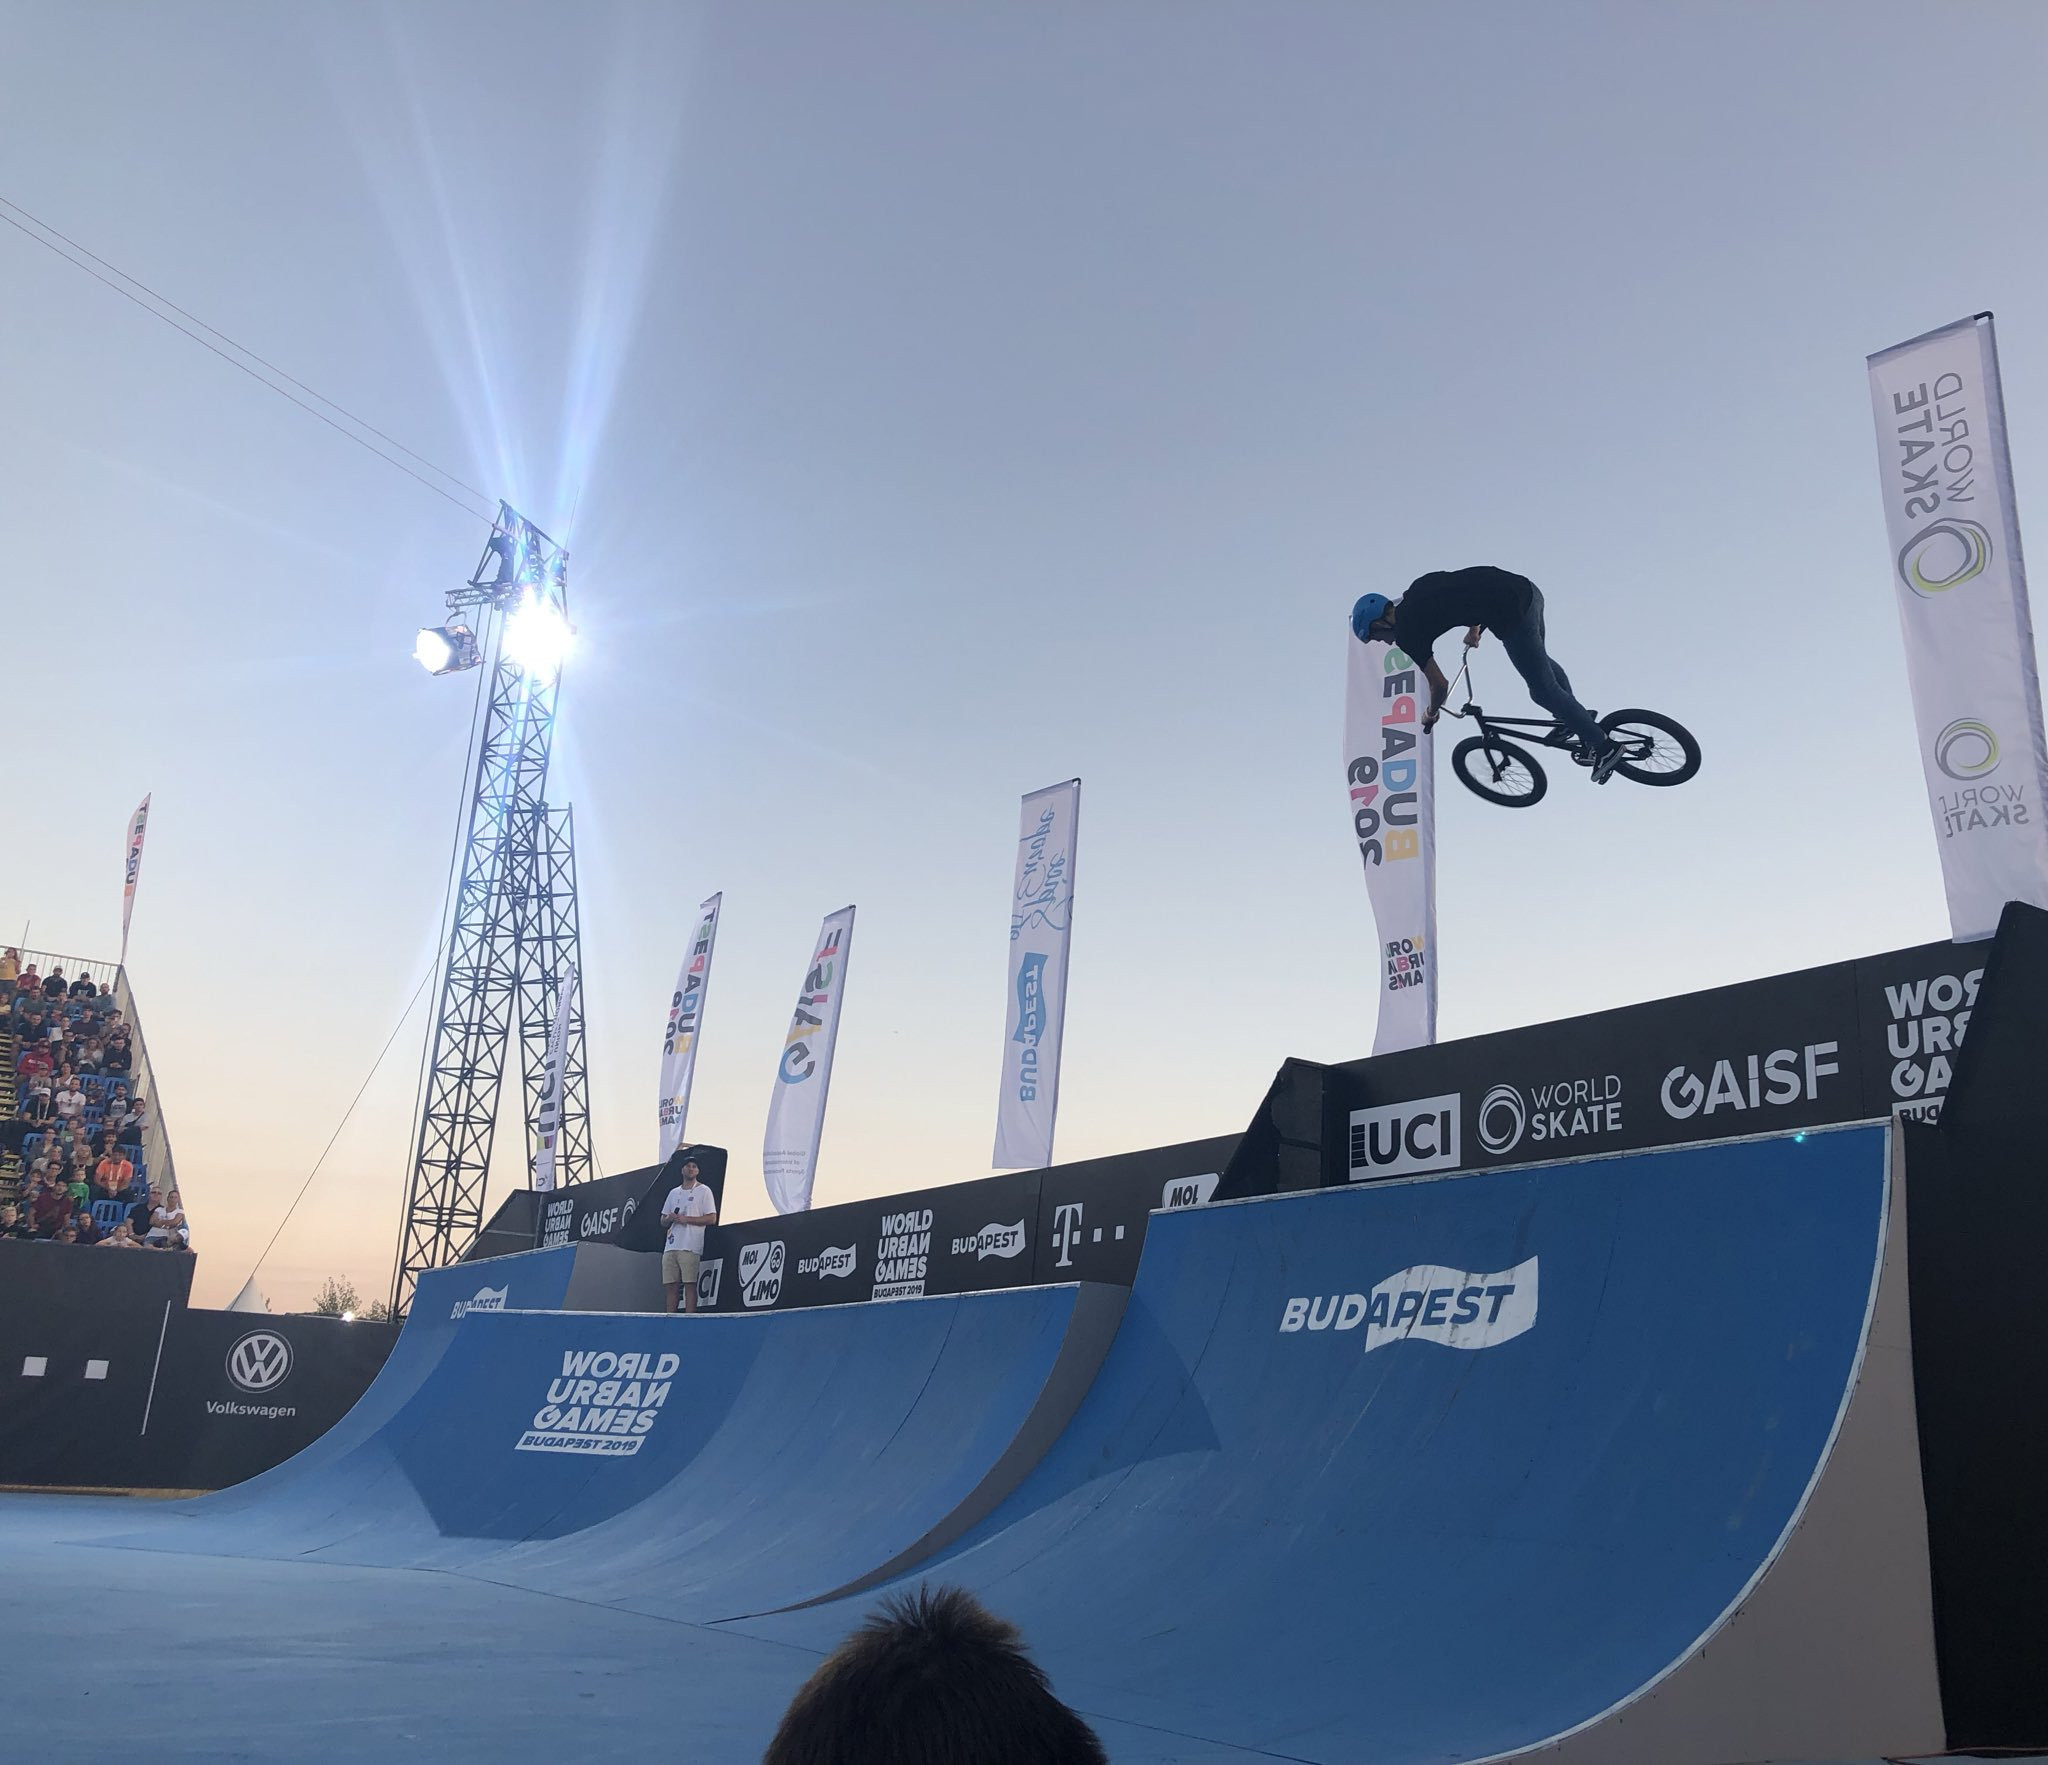 The first ever day of the World Urban Games saw six sports take place in Budapest ©Twitter/GAISF